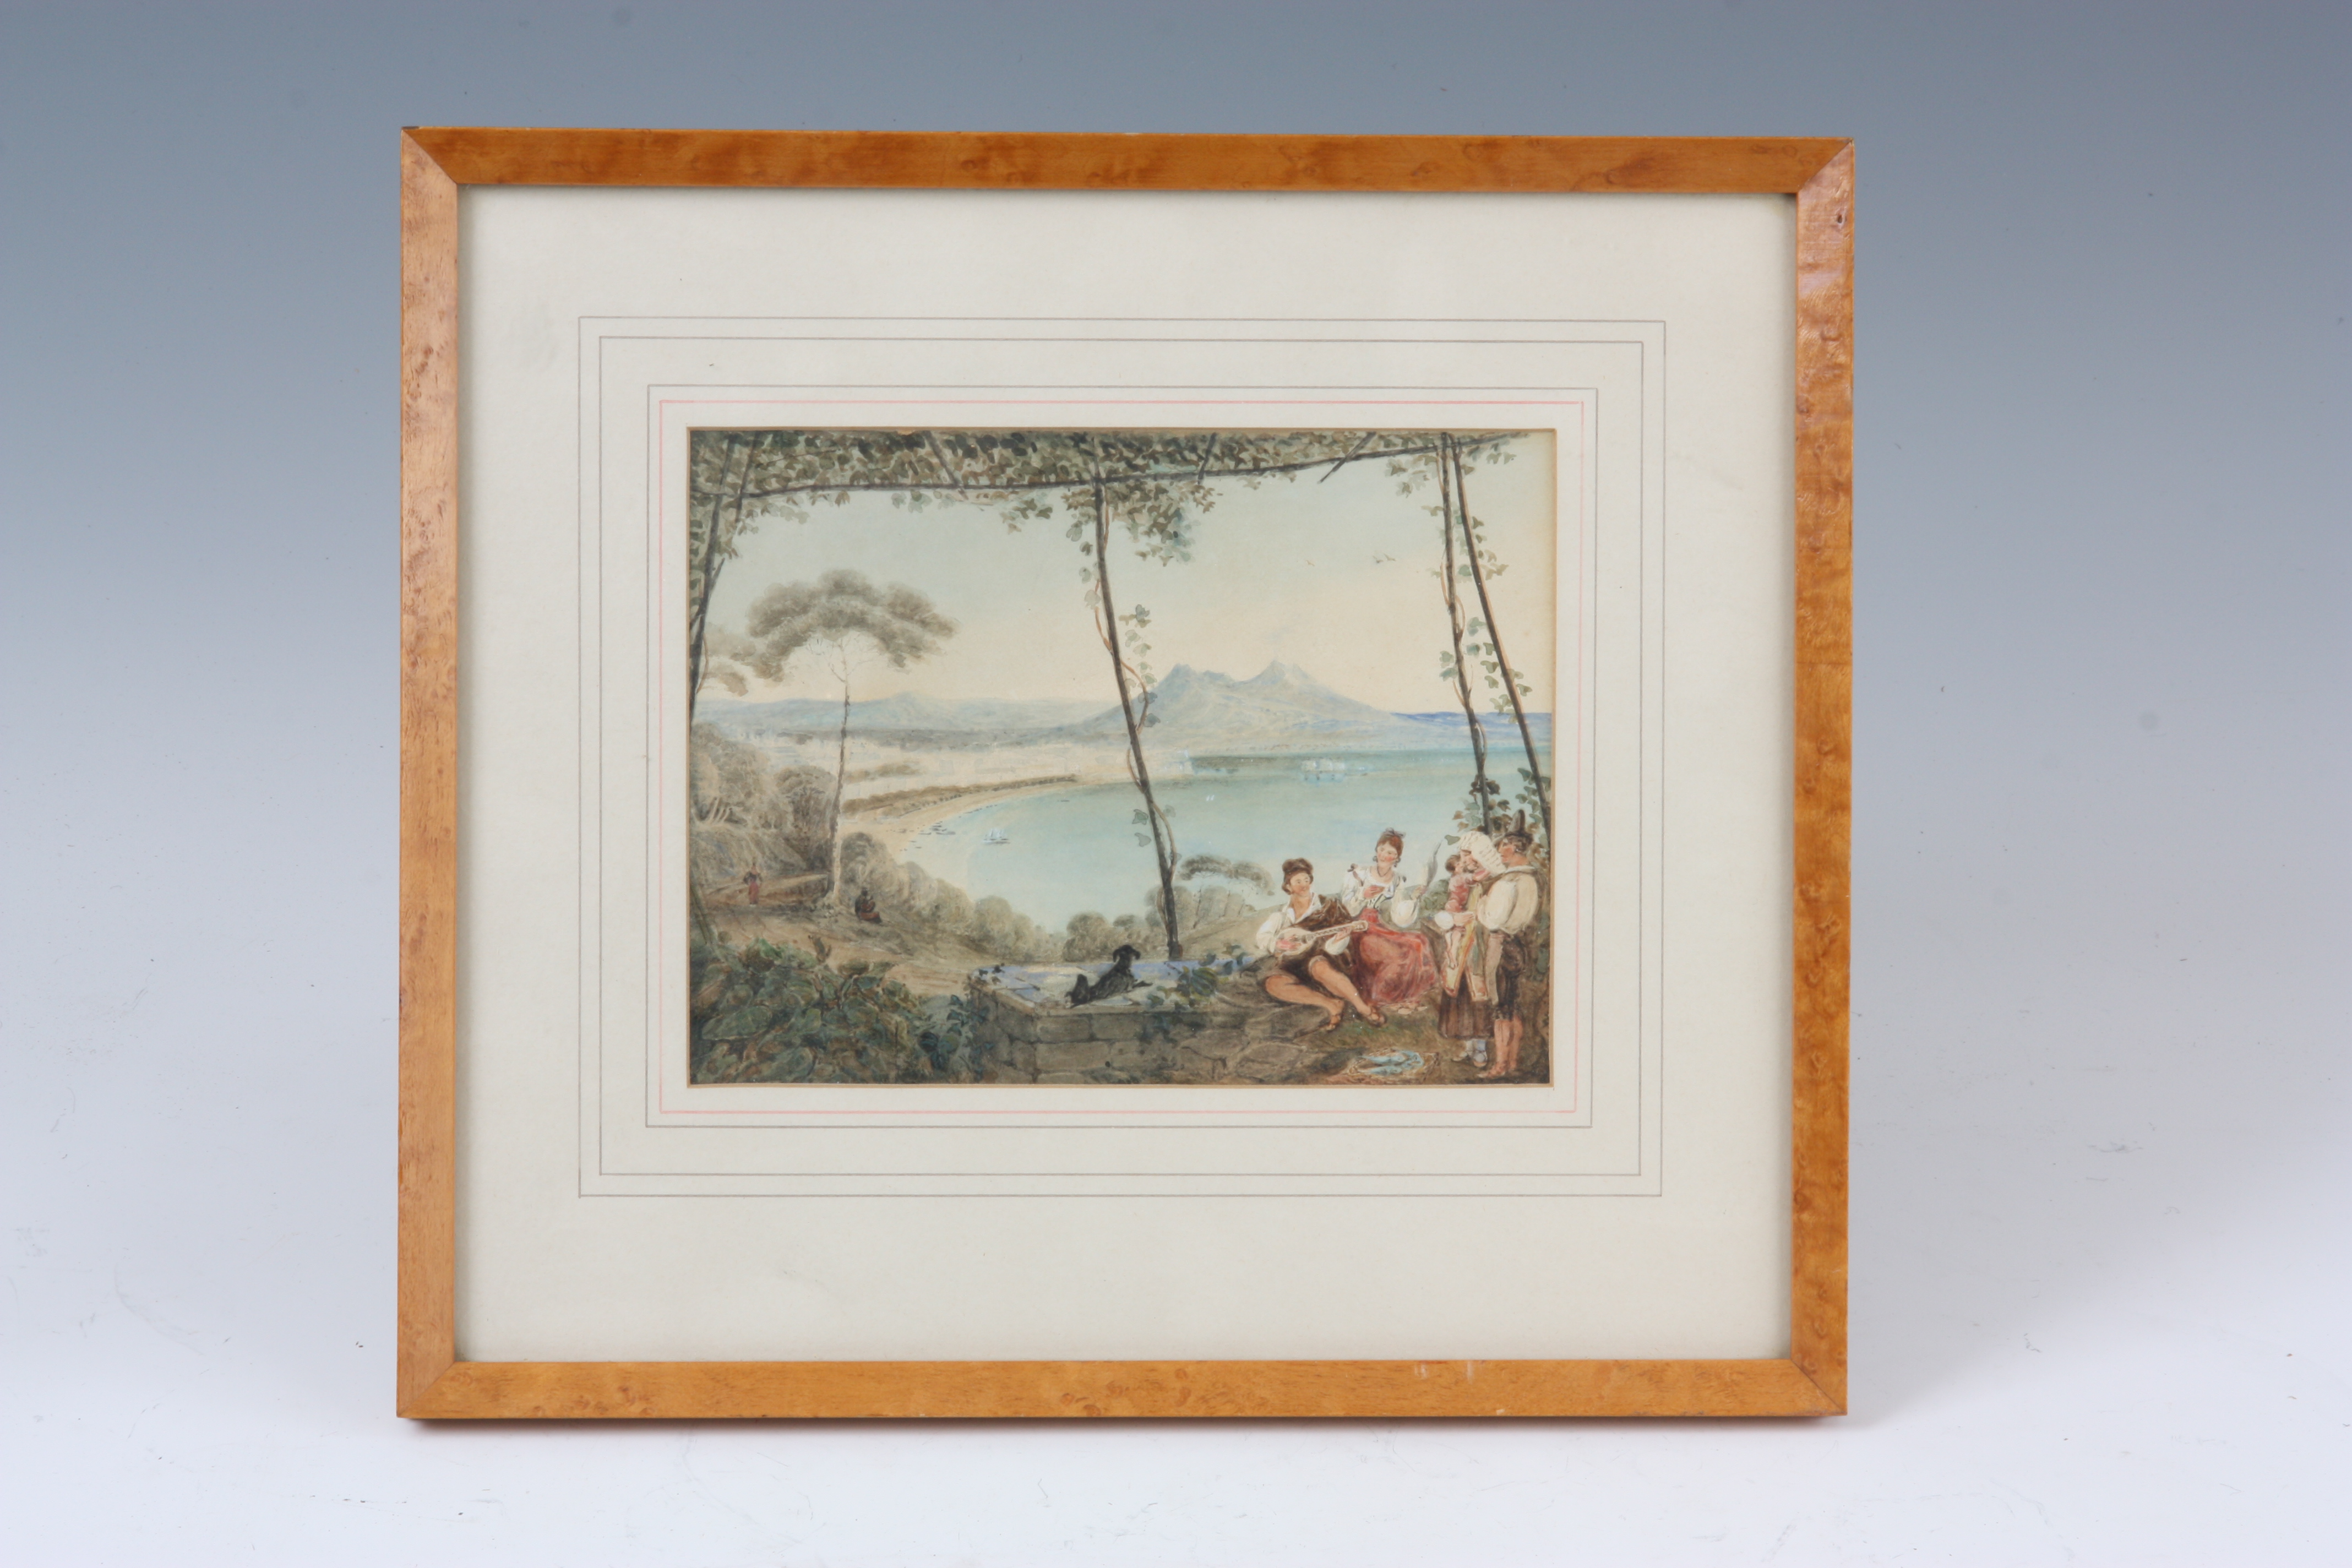 WATERCOLOUR A VIEW OF NAPLES 16cm high 21cm wide - in mounted glazed maple frame. - Image 2 of 3